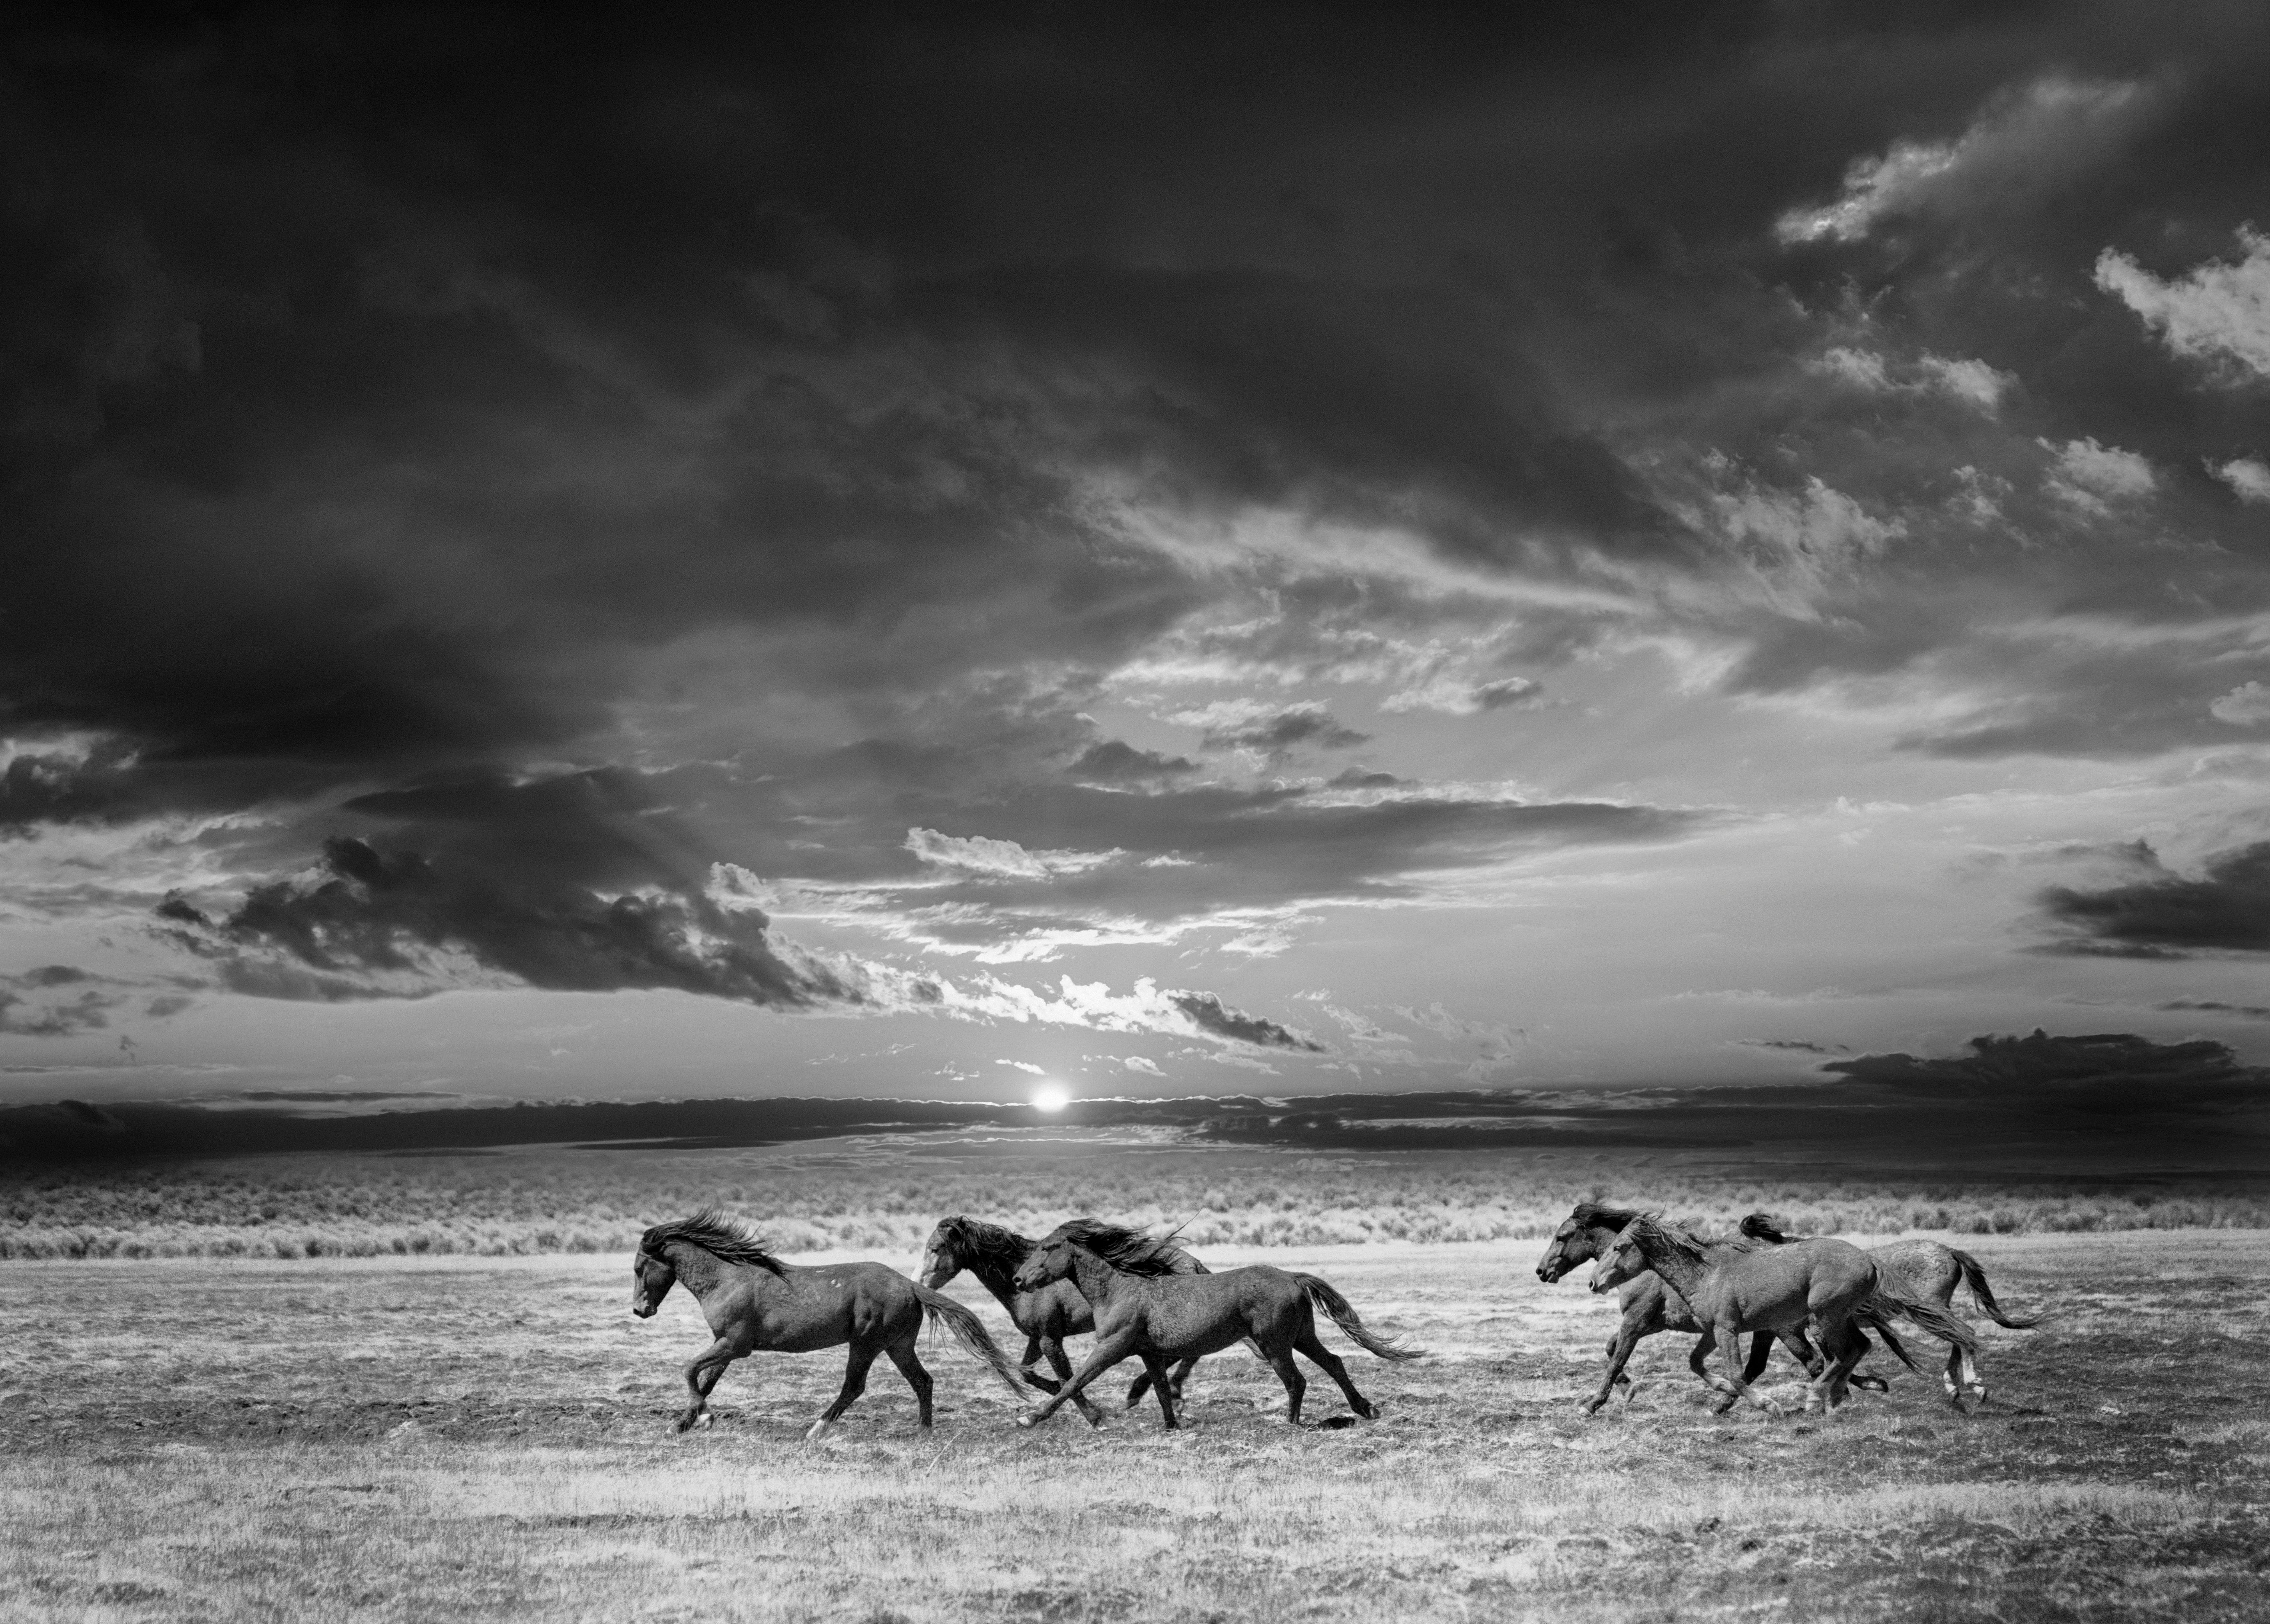 Shane Russeck Black and White Photograph - 36x48 Photography of Wild Horses - Mustangs Photograph Print Sunset Landscape